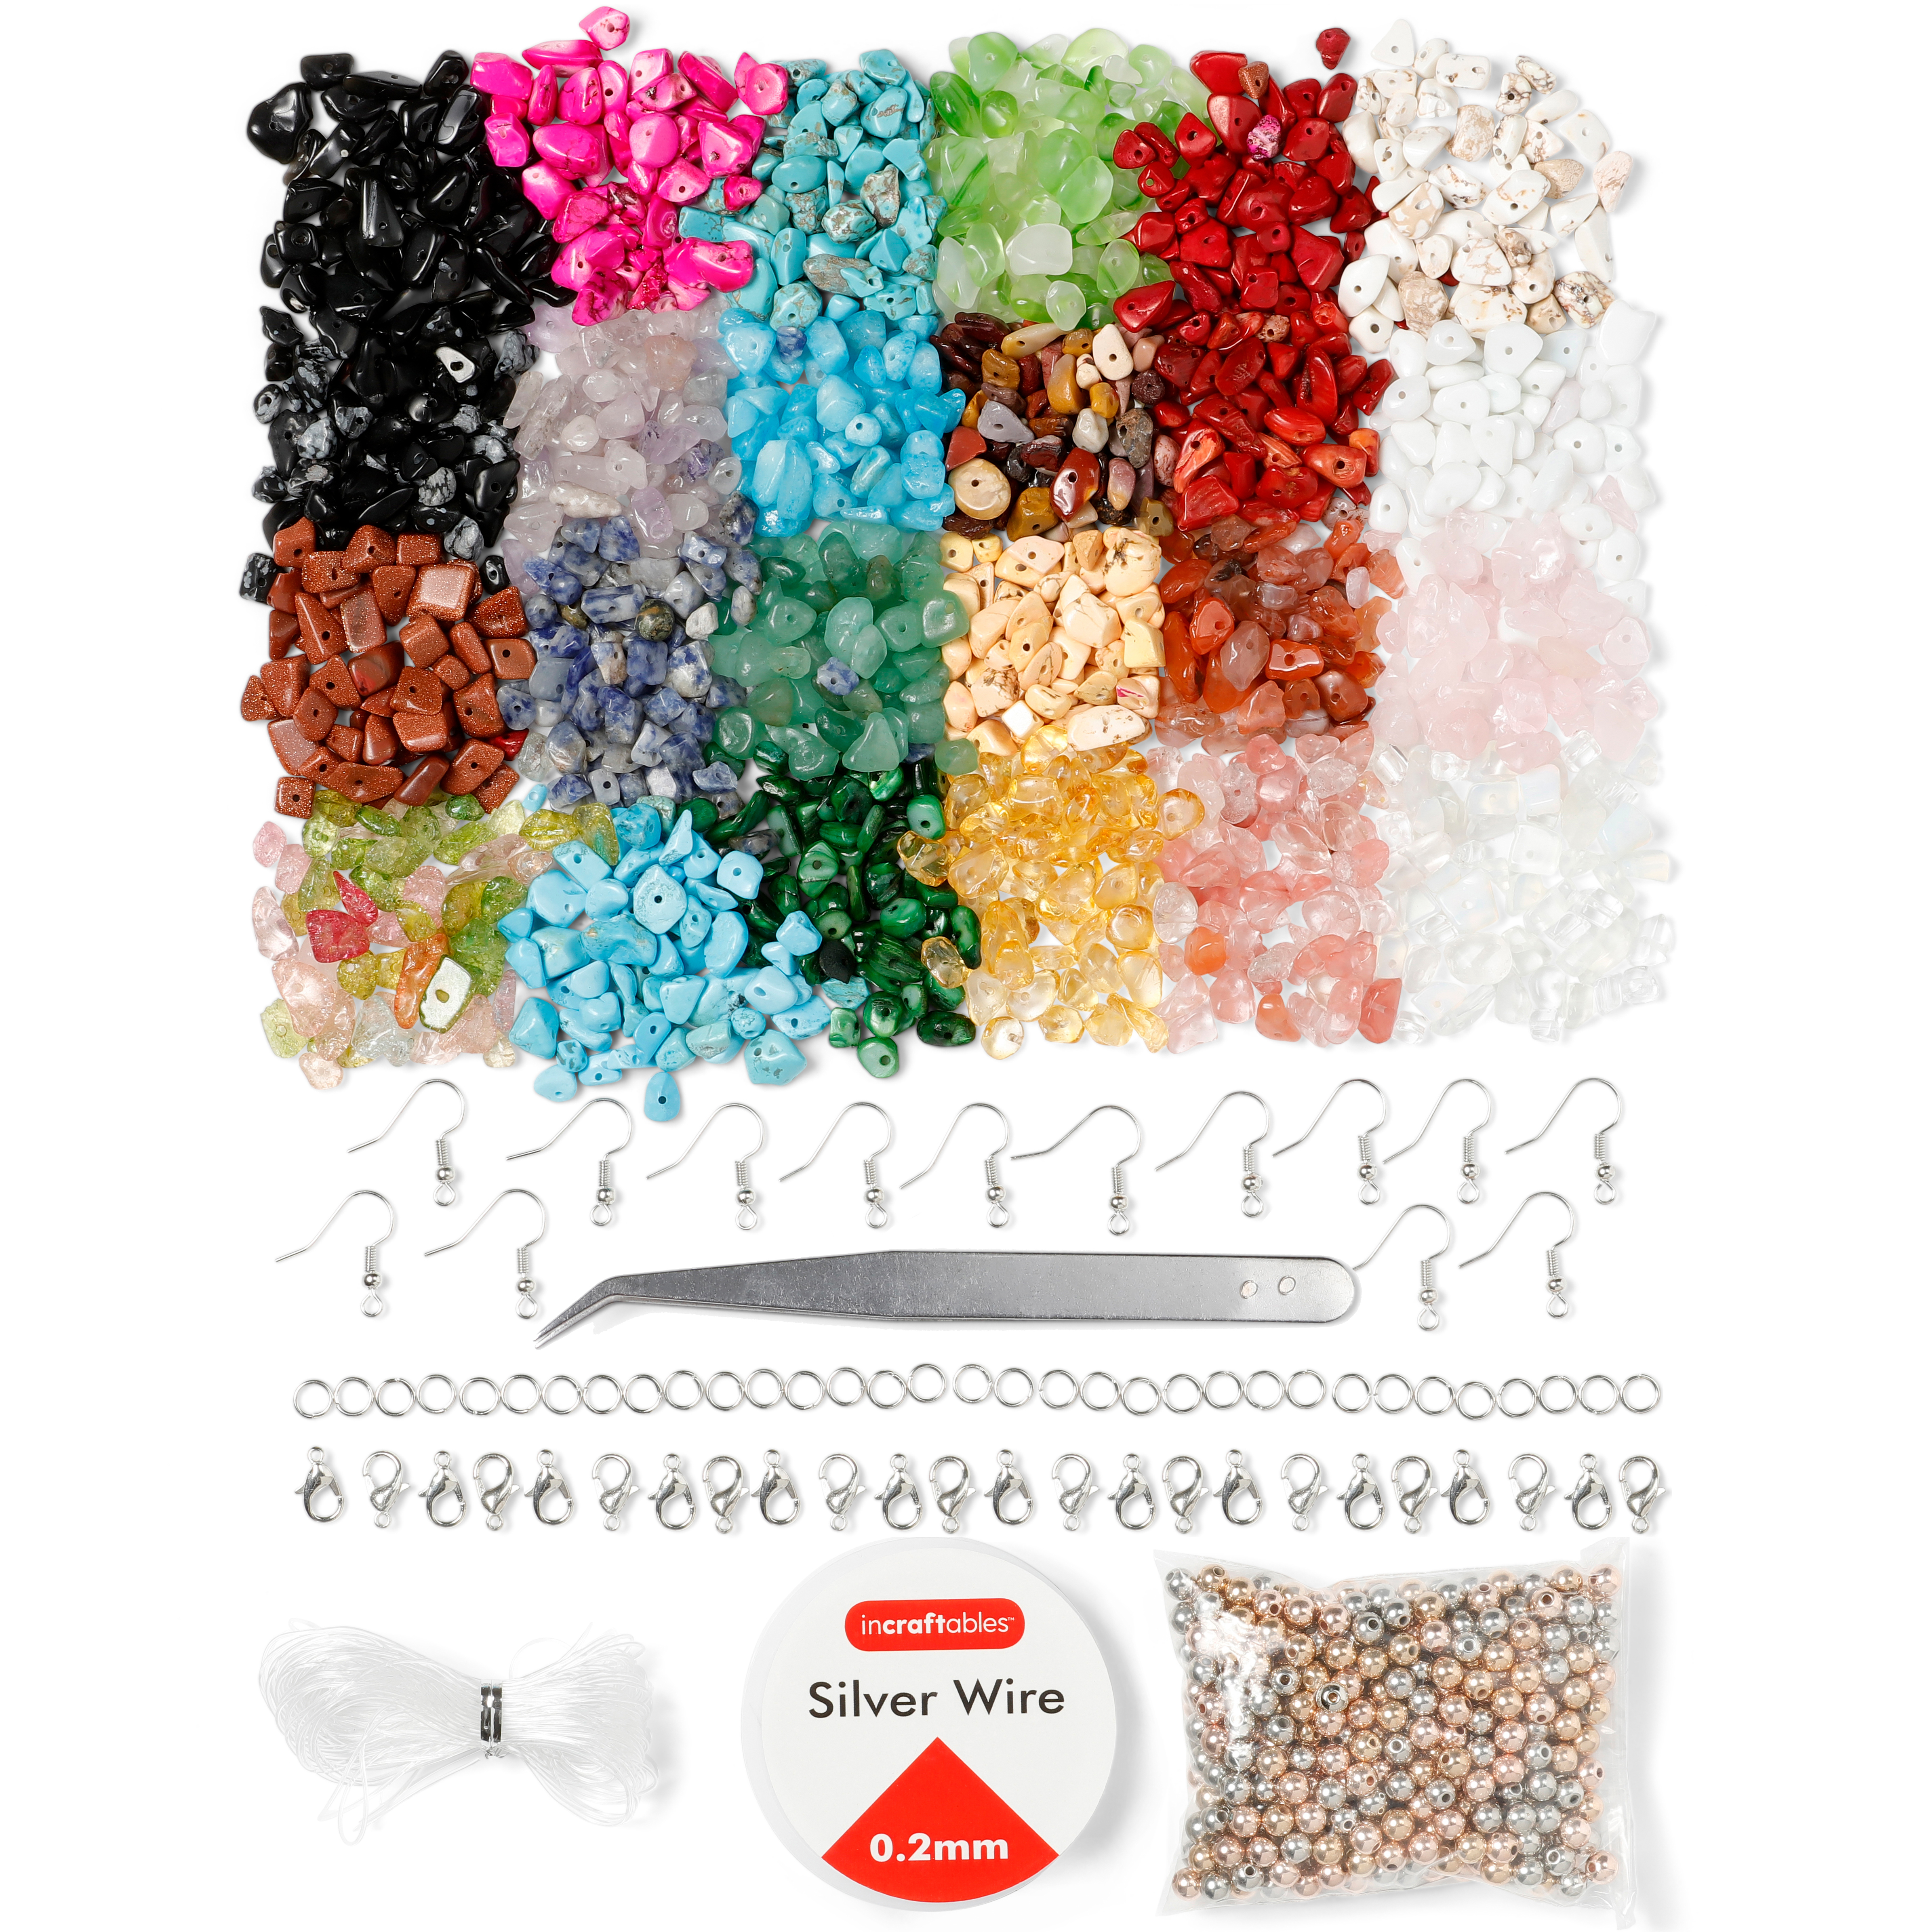 Incraftables 1000pcs Crystal Gemstone Beads for Jewelry Making (24